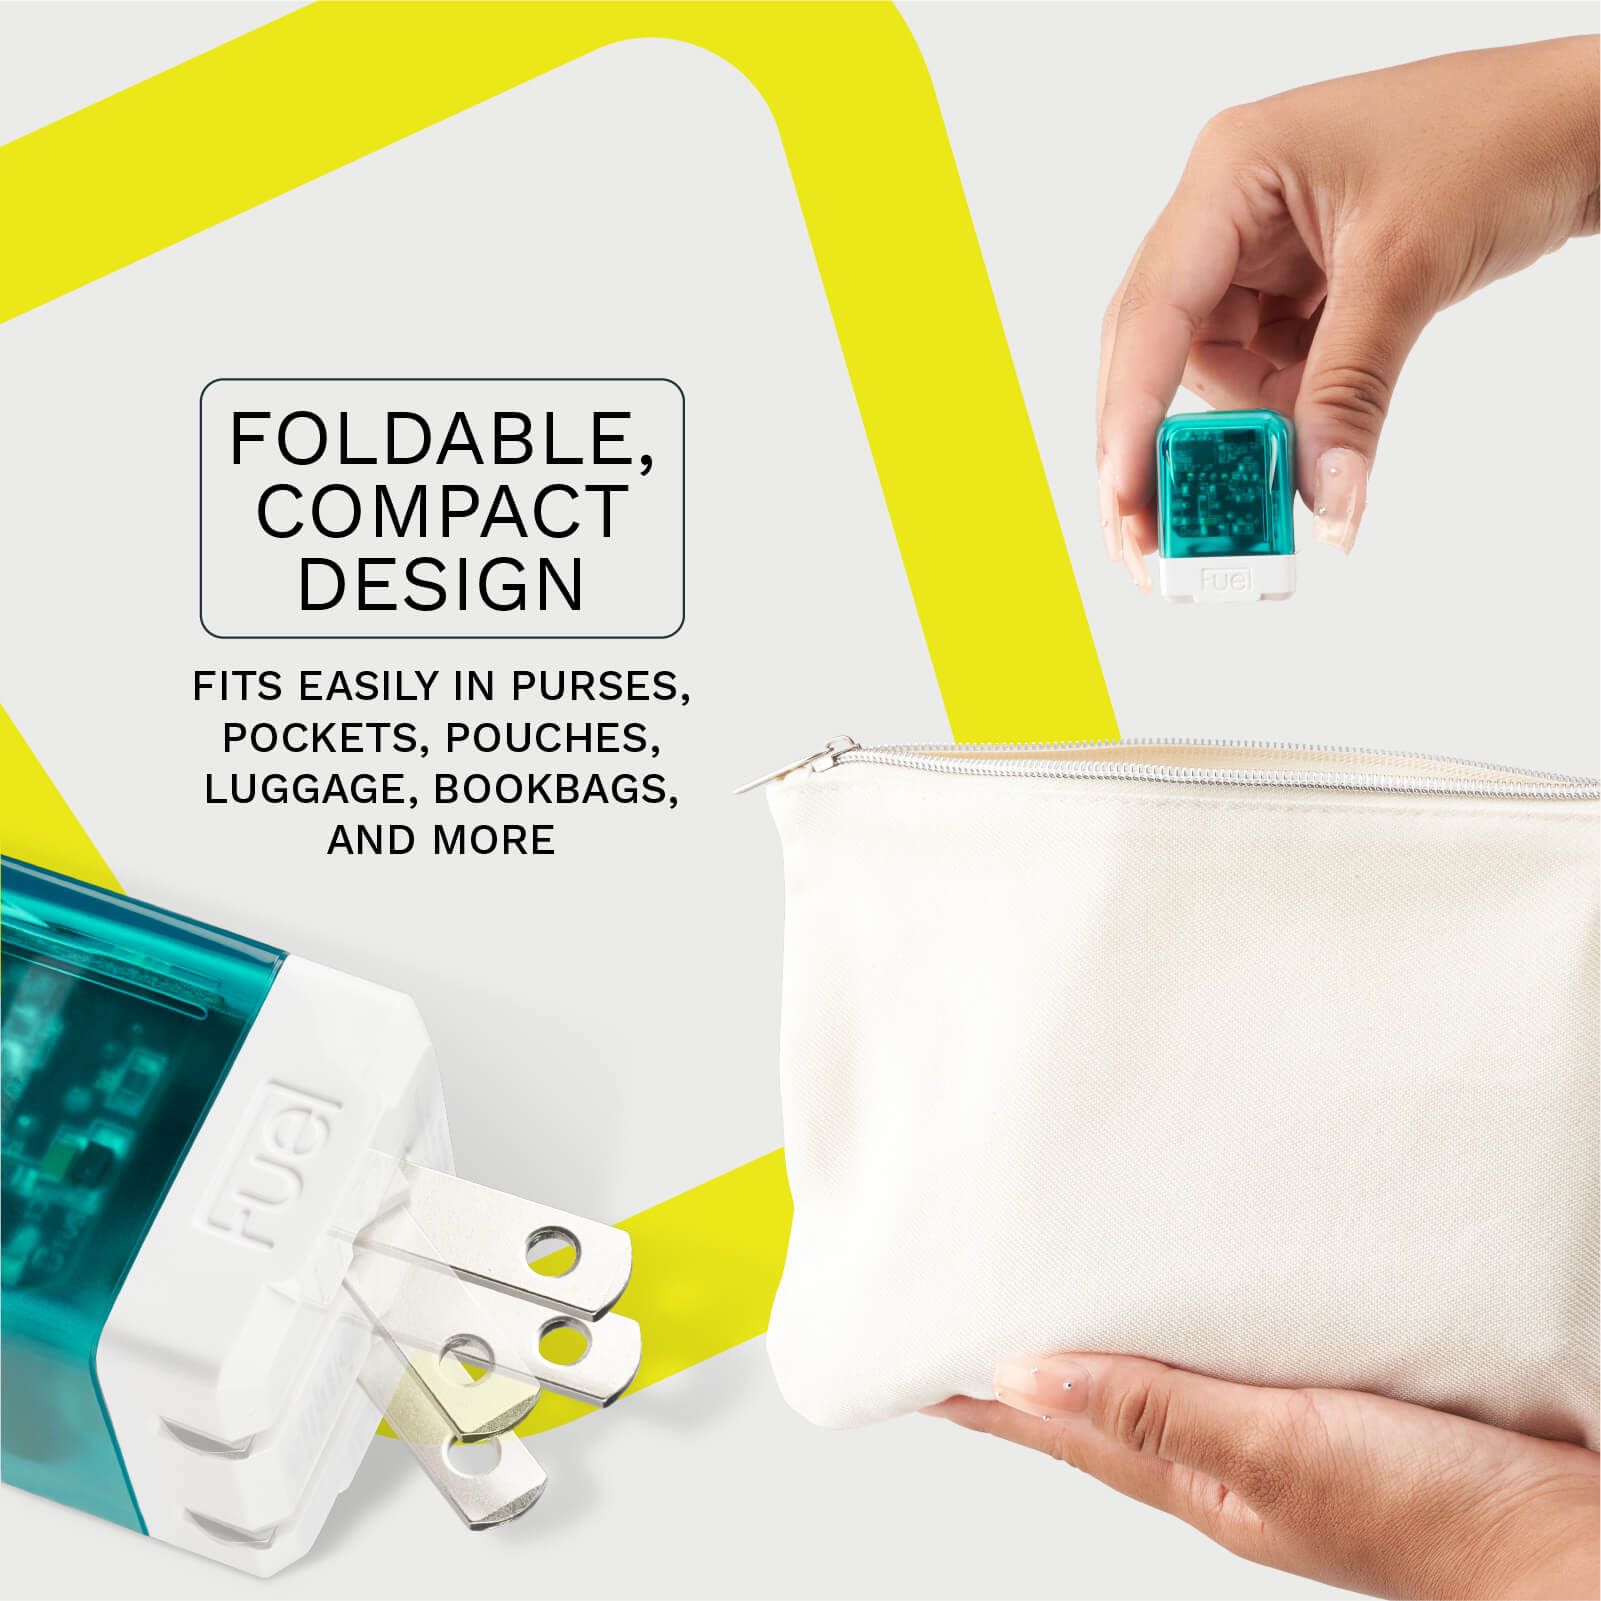 FOLDABLE, COMPACT DESIGN. FITS EASILY IN PURSES, POCKETS, POUCHES, LUGGAGE, BOOKBAGS, AND MORE